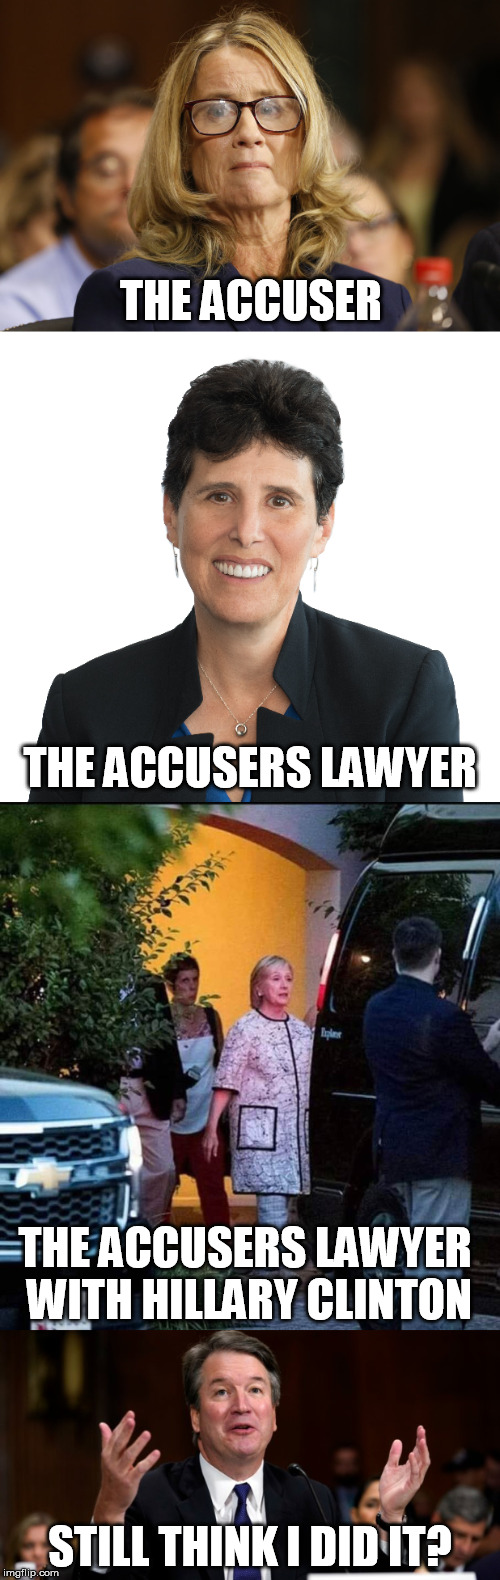 The Accuser | THE ACCUSER; THE ACCUSERS LAWYER; THE ACCUSERS LAWYER WITH HILLARY CLINTON; STILL THINK I DID IT? | image tagged in brett kavanaugh,christine blasey ford,political meme,scotus,donald trump | made w/ Imgflip meme maker